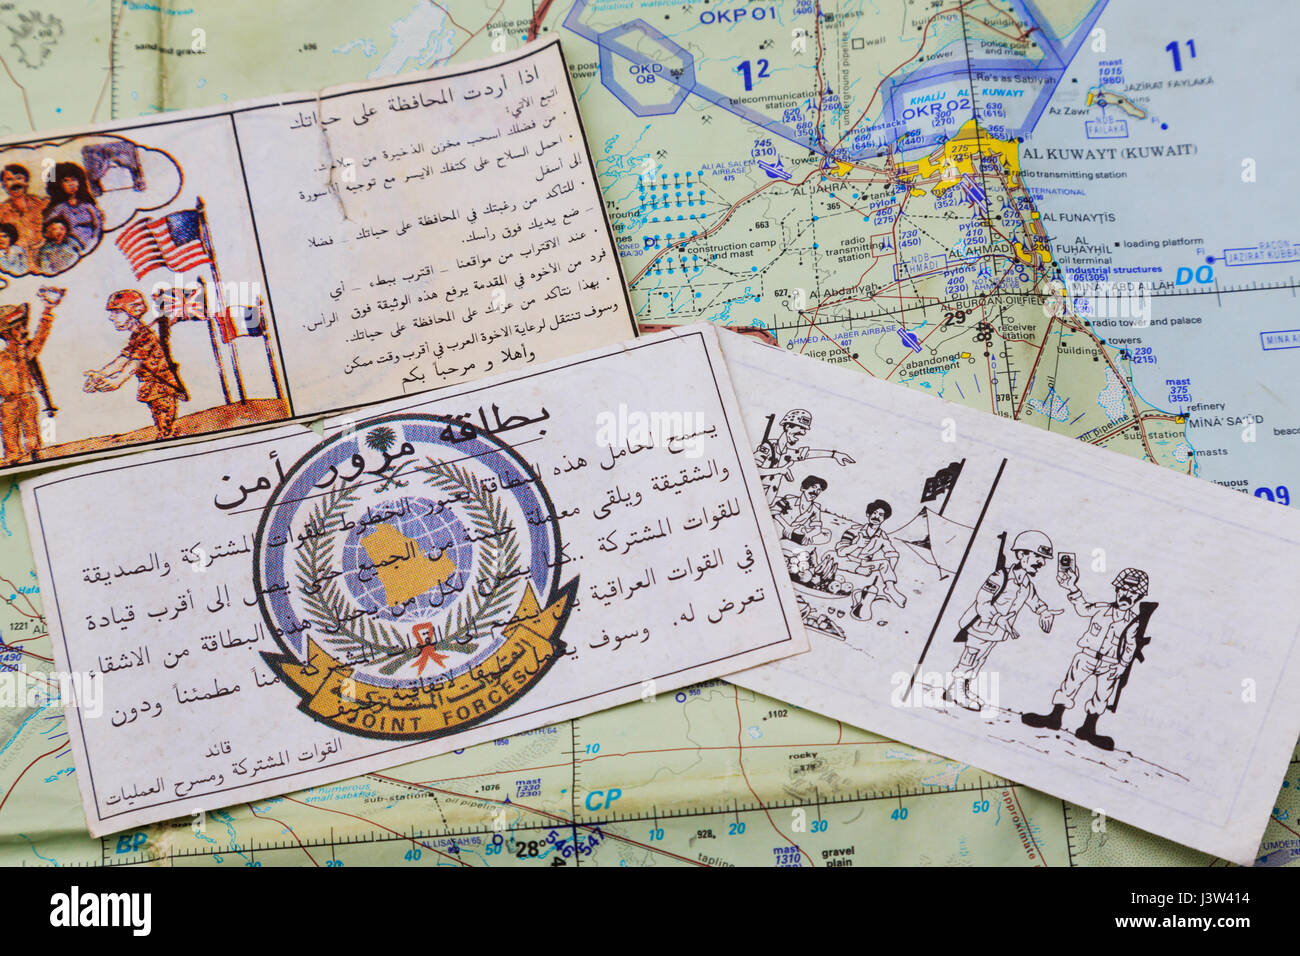 Psyops Leaflets encouraging Iraqi forces to surrender to Coallition forces during the Gulf War of 1990-1991, seen over an air map. Stock Photo